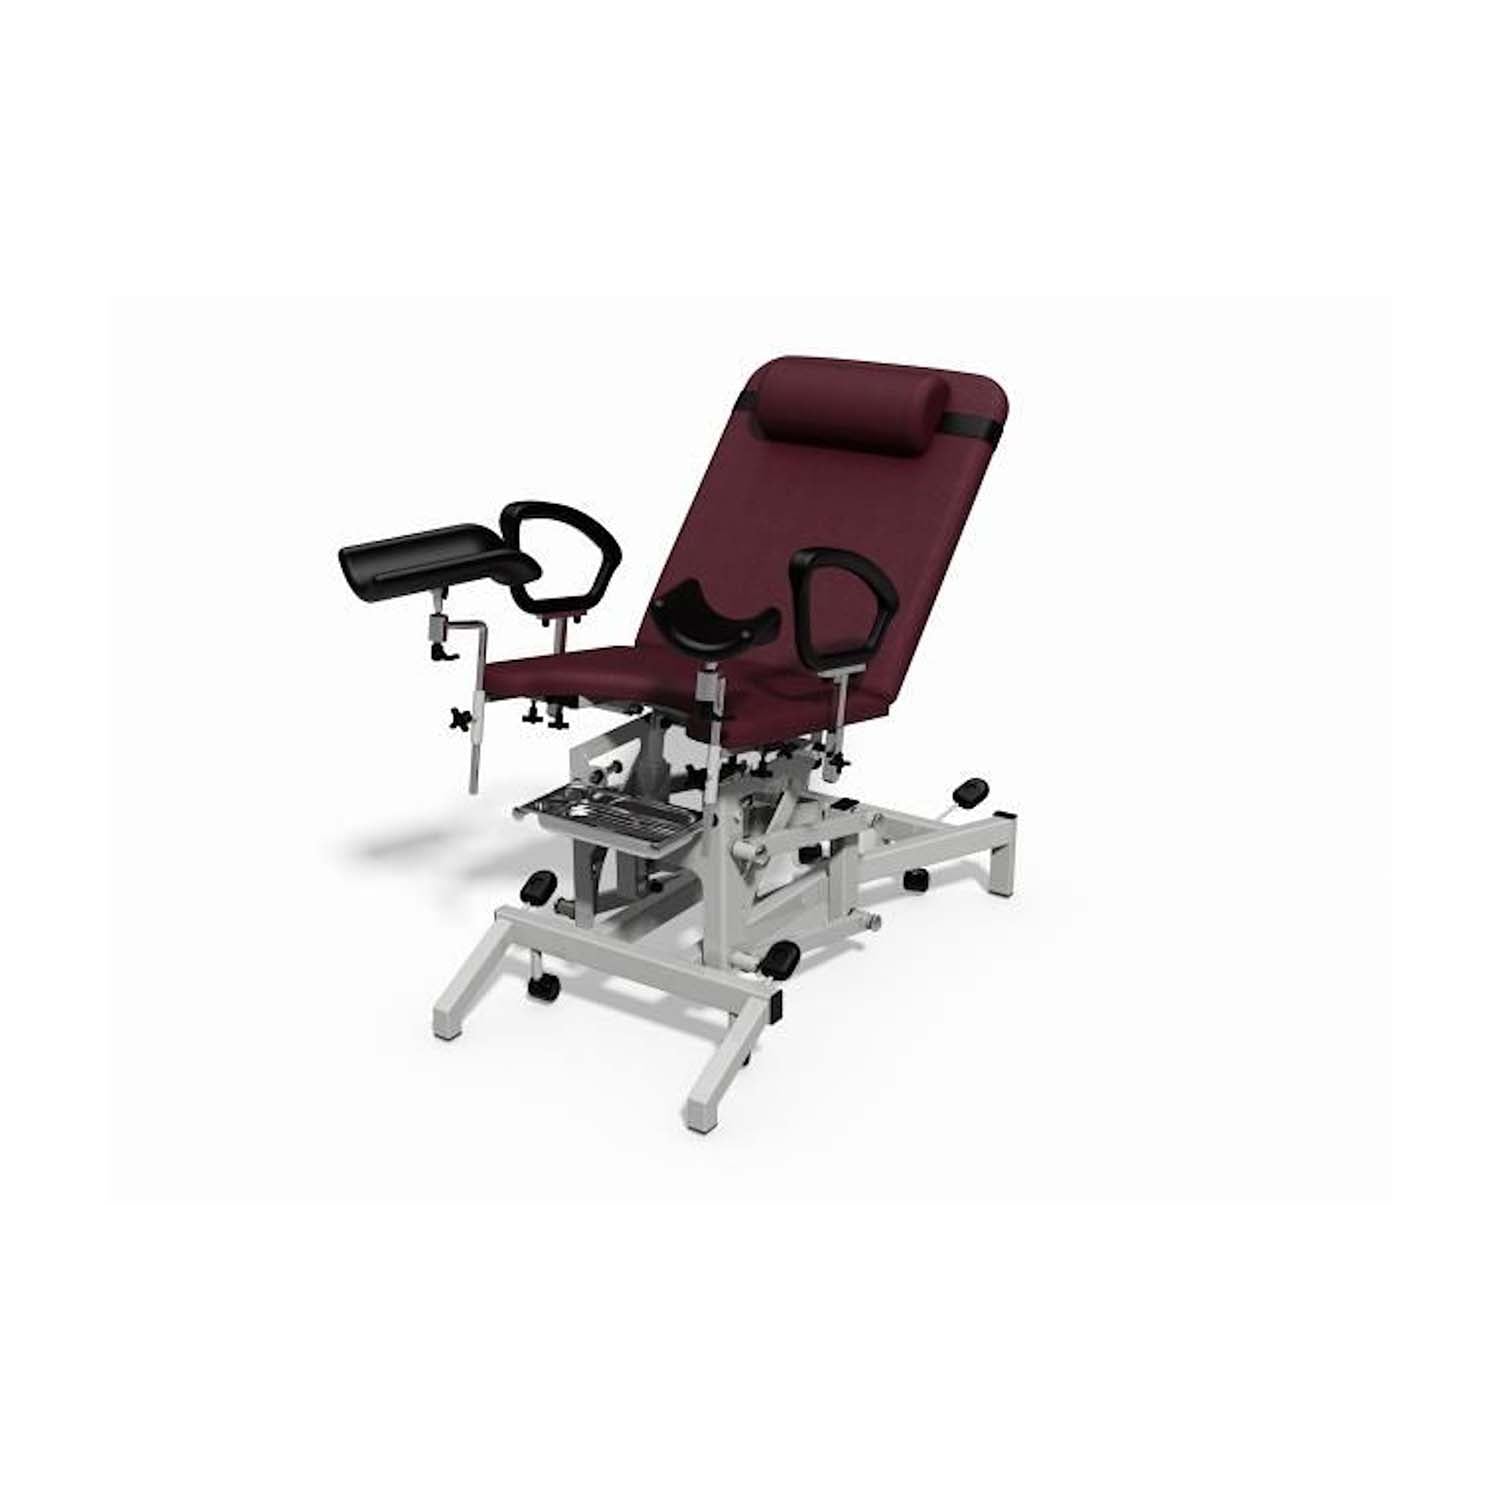 Plinth 2000 Model 93G Gynaecology Chair 2 Motor | Mulled Wine